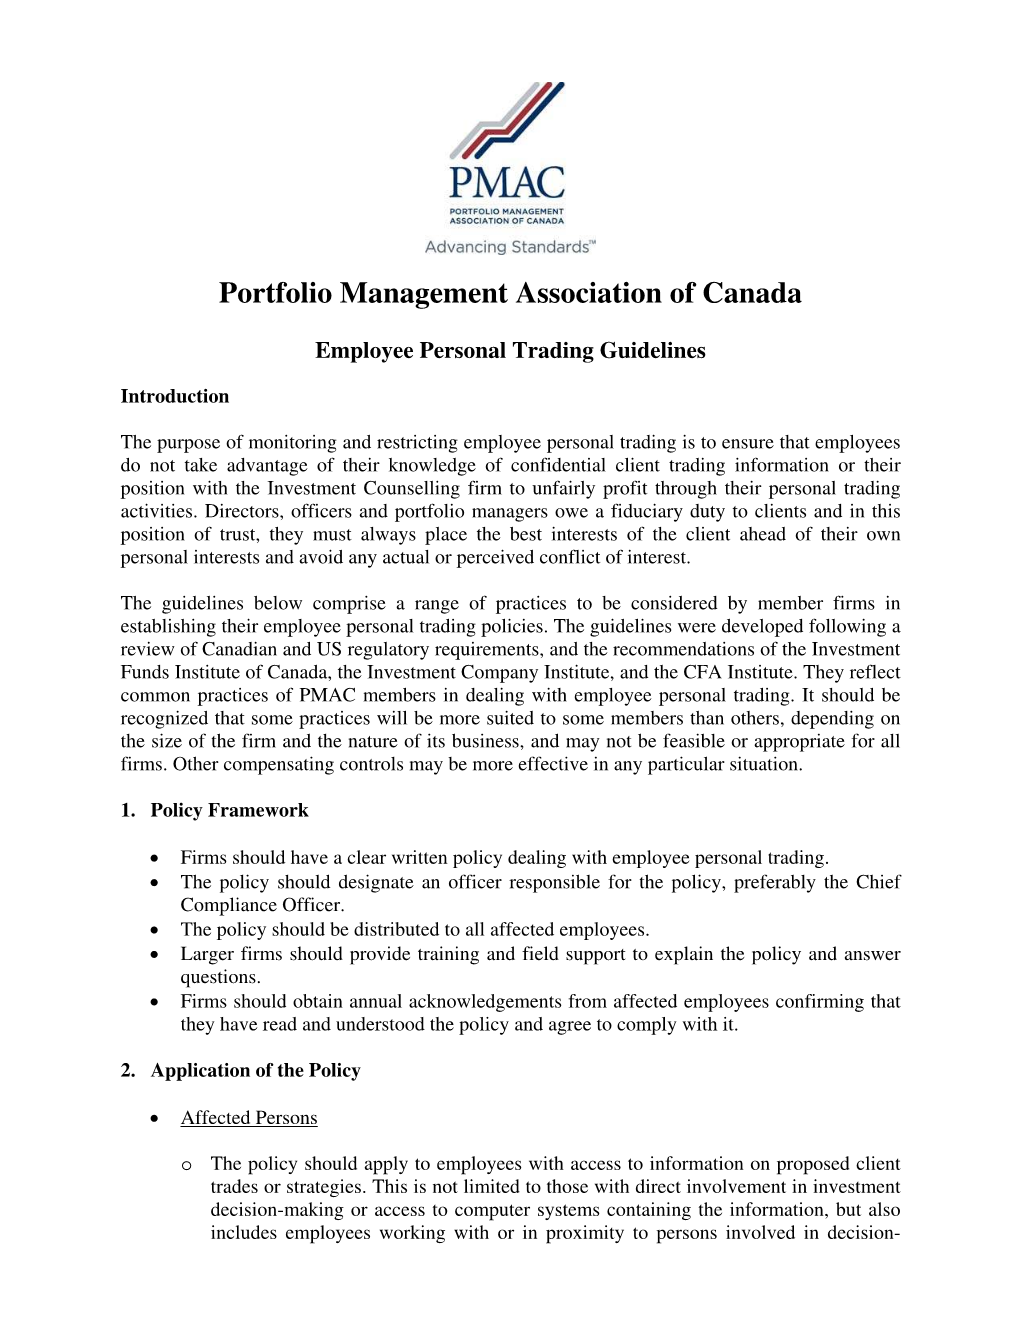 Employee Personal Trading Guidelines